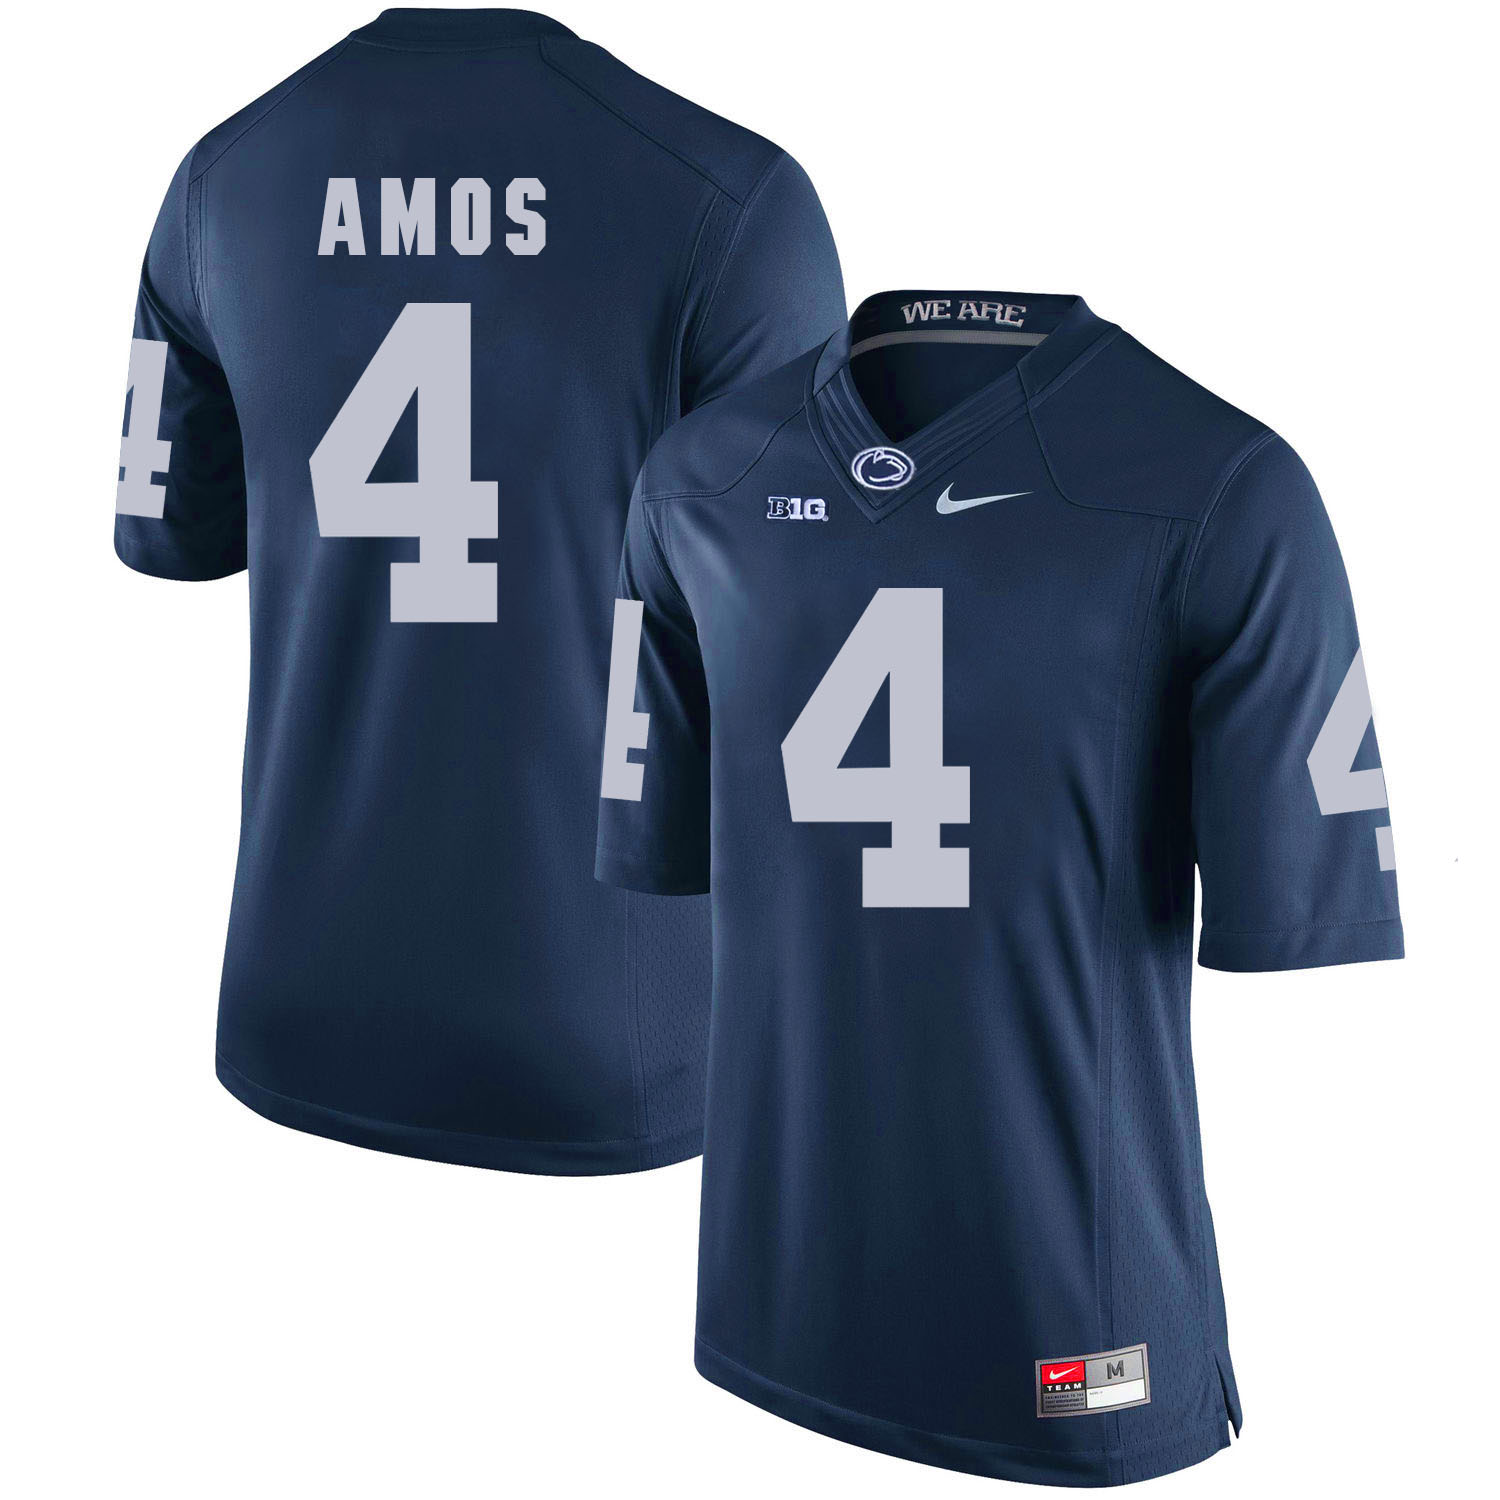 Penn State Nittany Lions 4 Adrian Amos Navy College Football Jersey